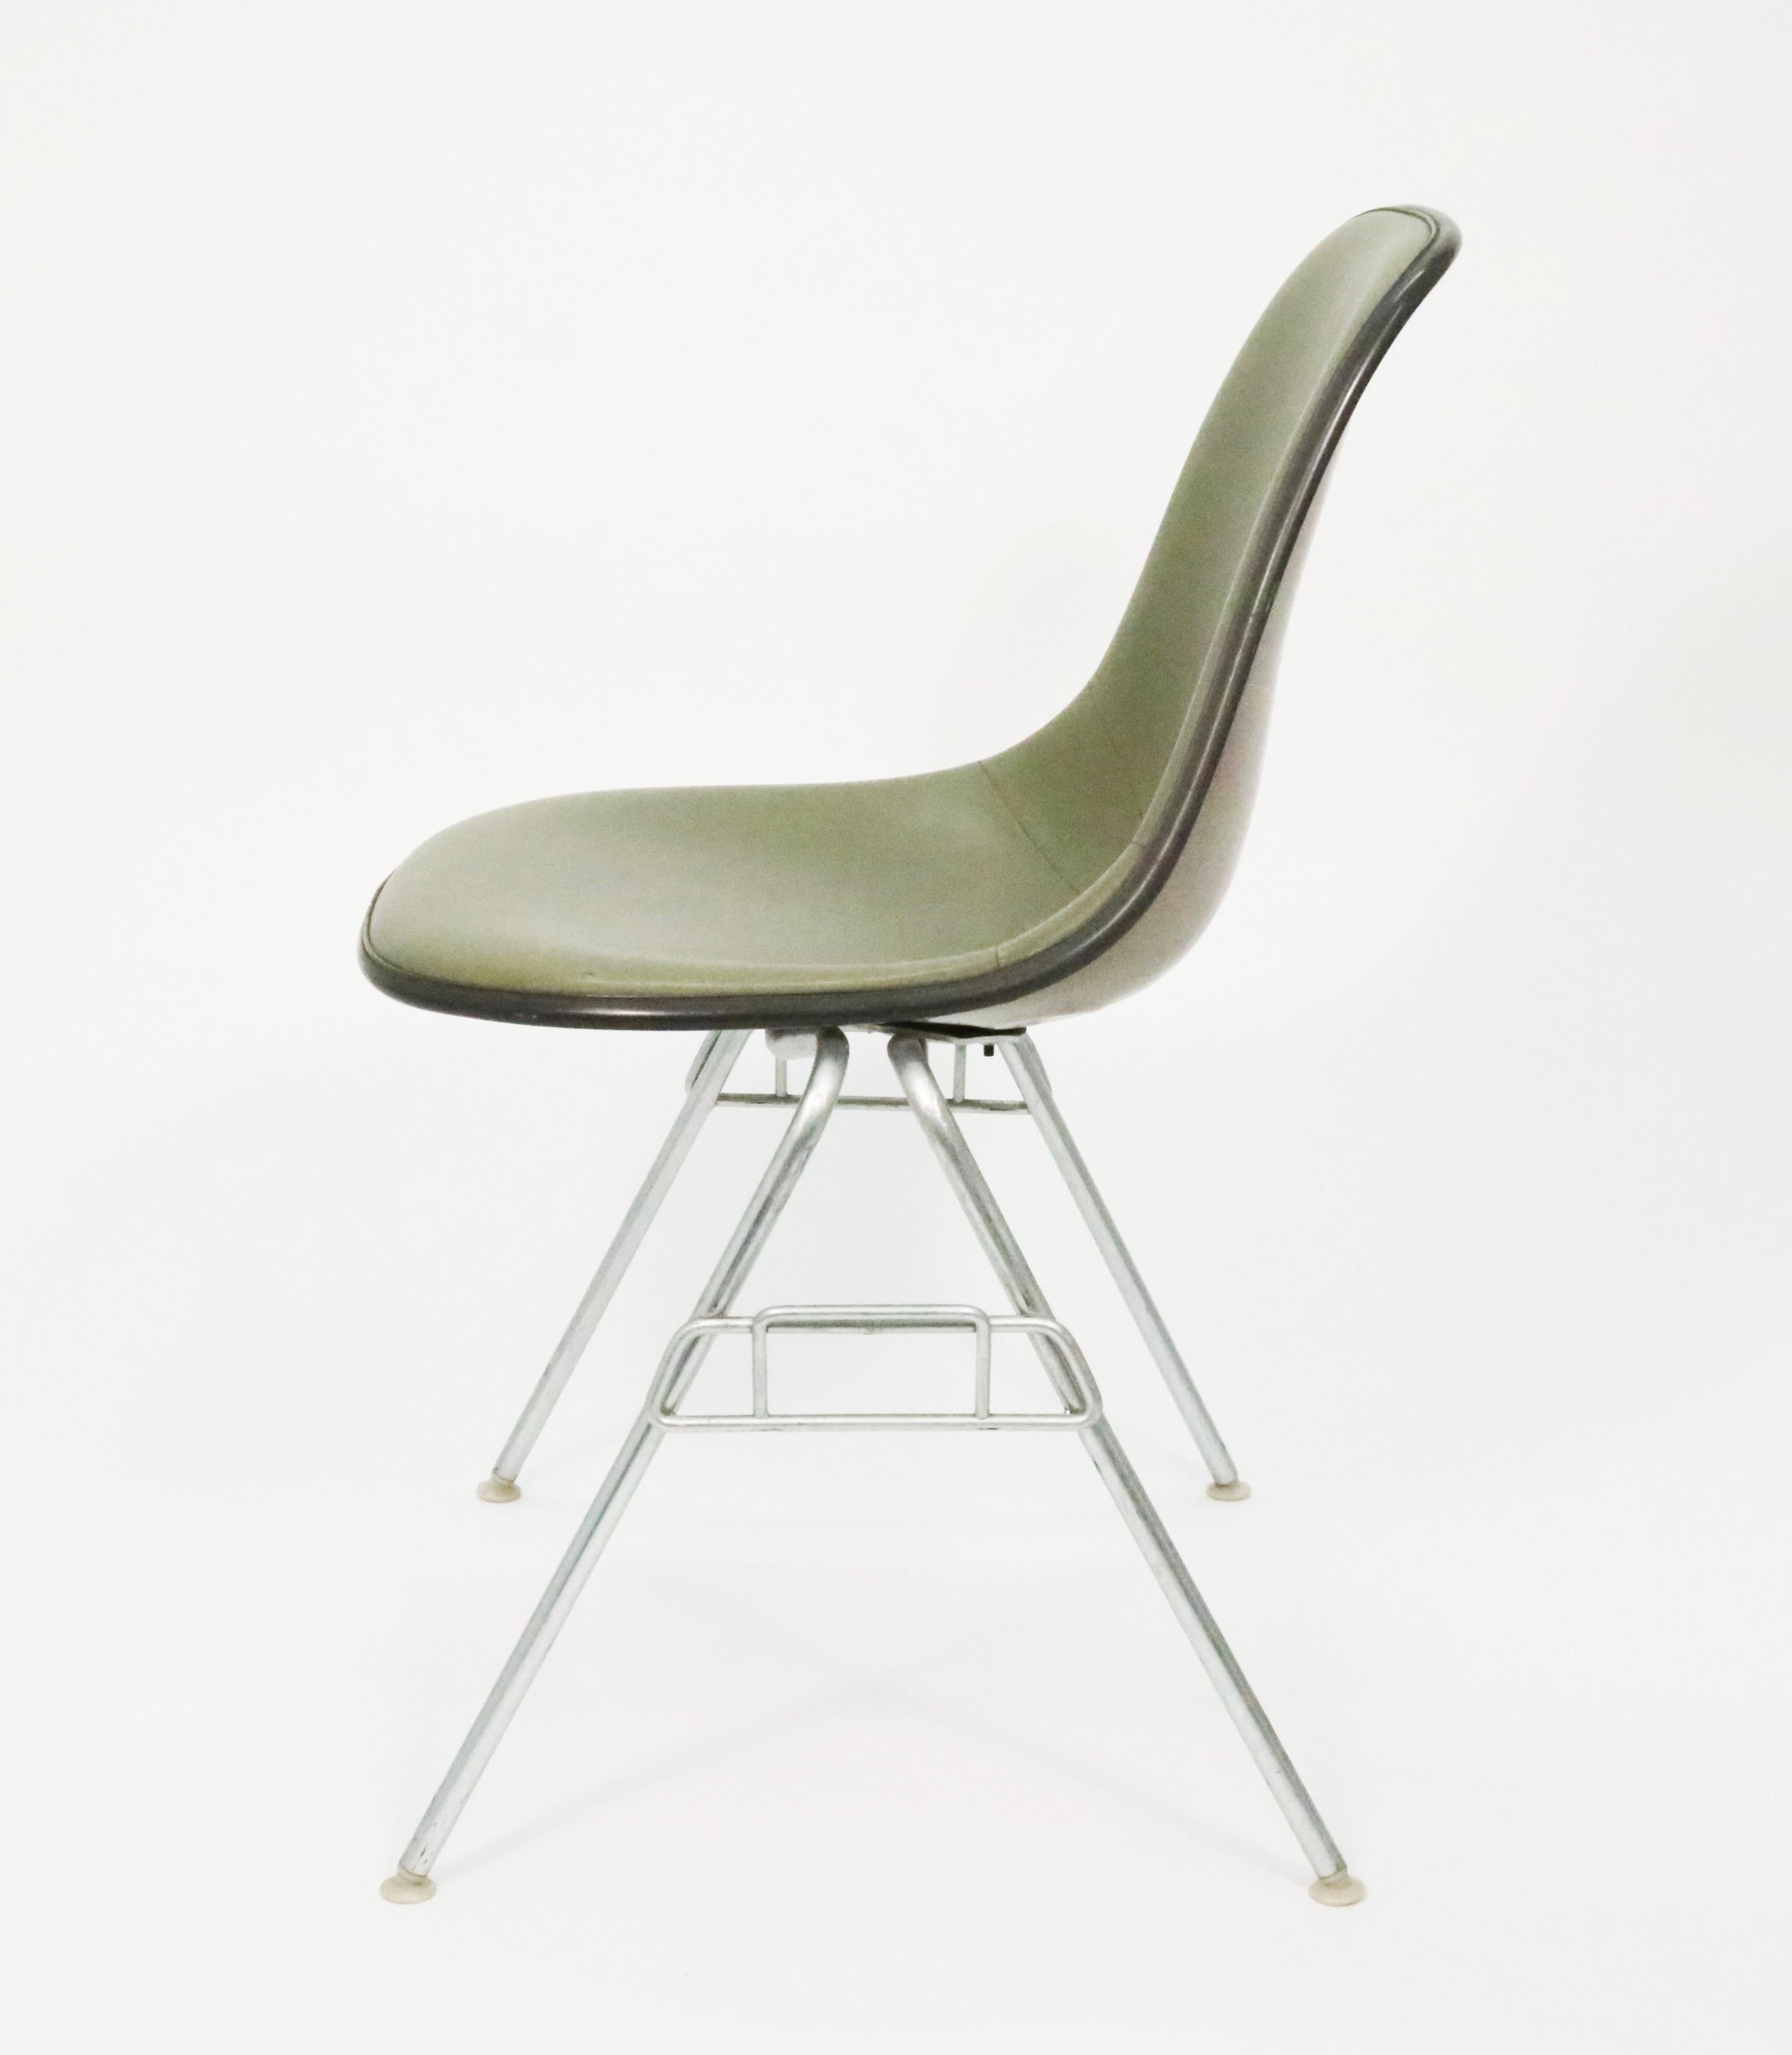 American Eames for Herman Miller Fiberglass Shell Chair, Green on Stackable Base